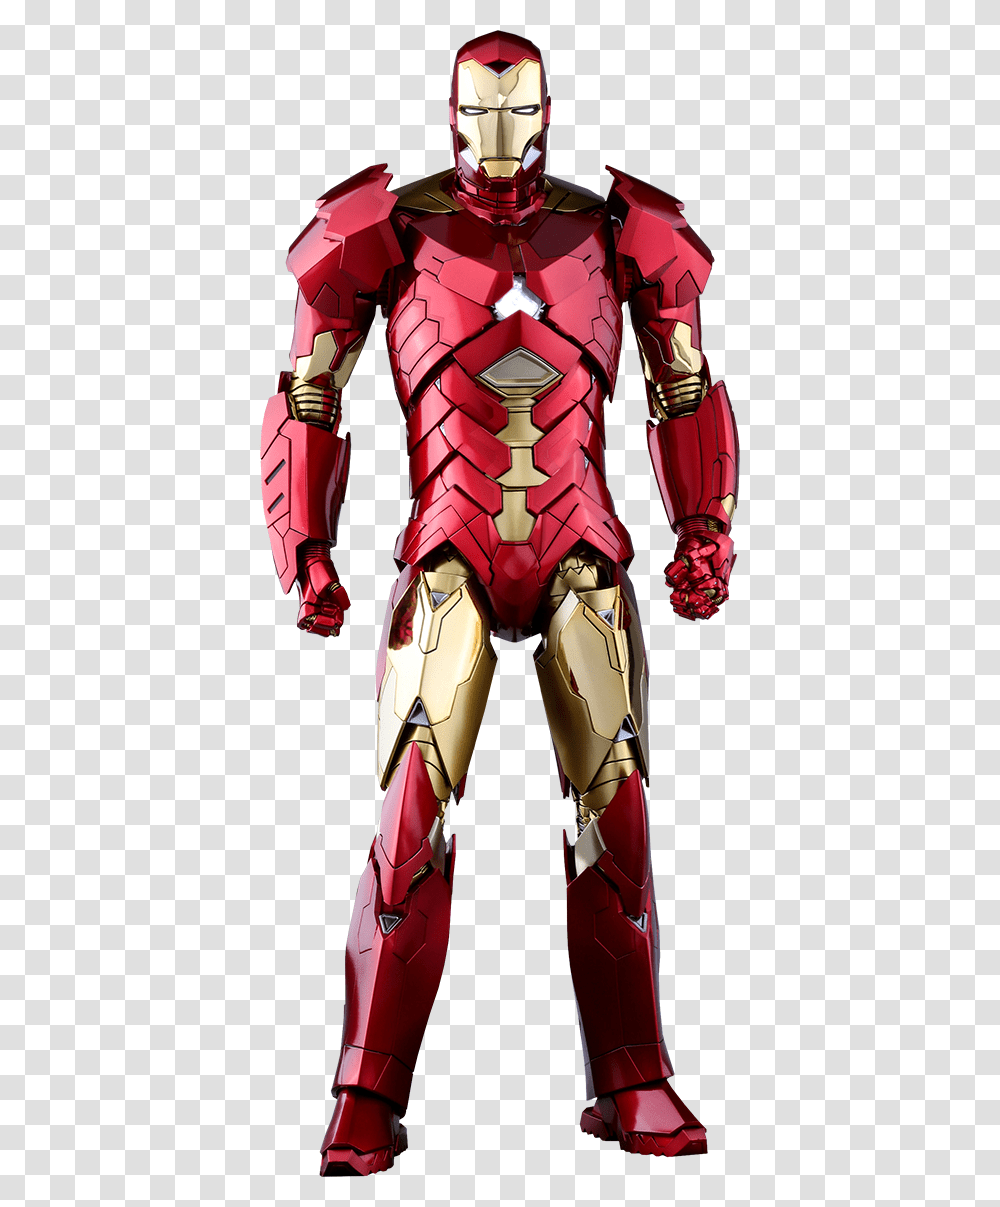 Iron Man Mark 15 Retro, Toy, Costume, Armor, Sweets Transparent Png